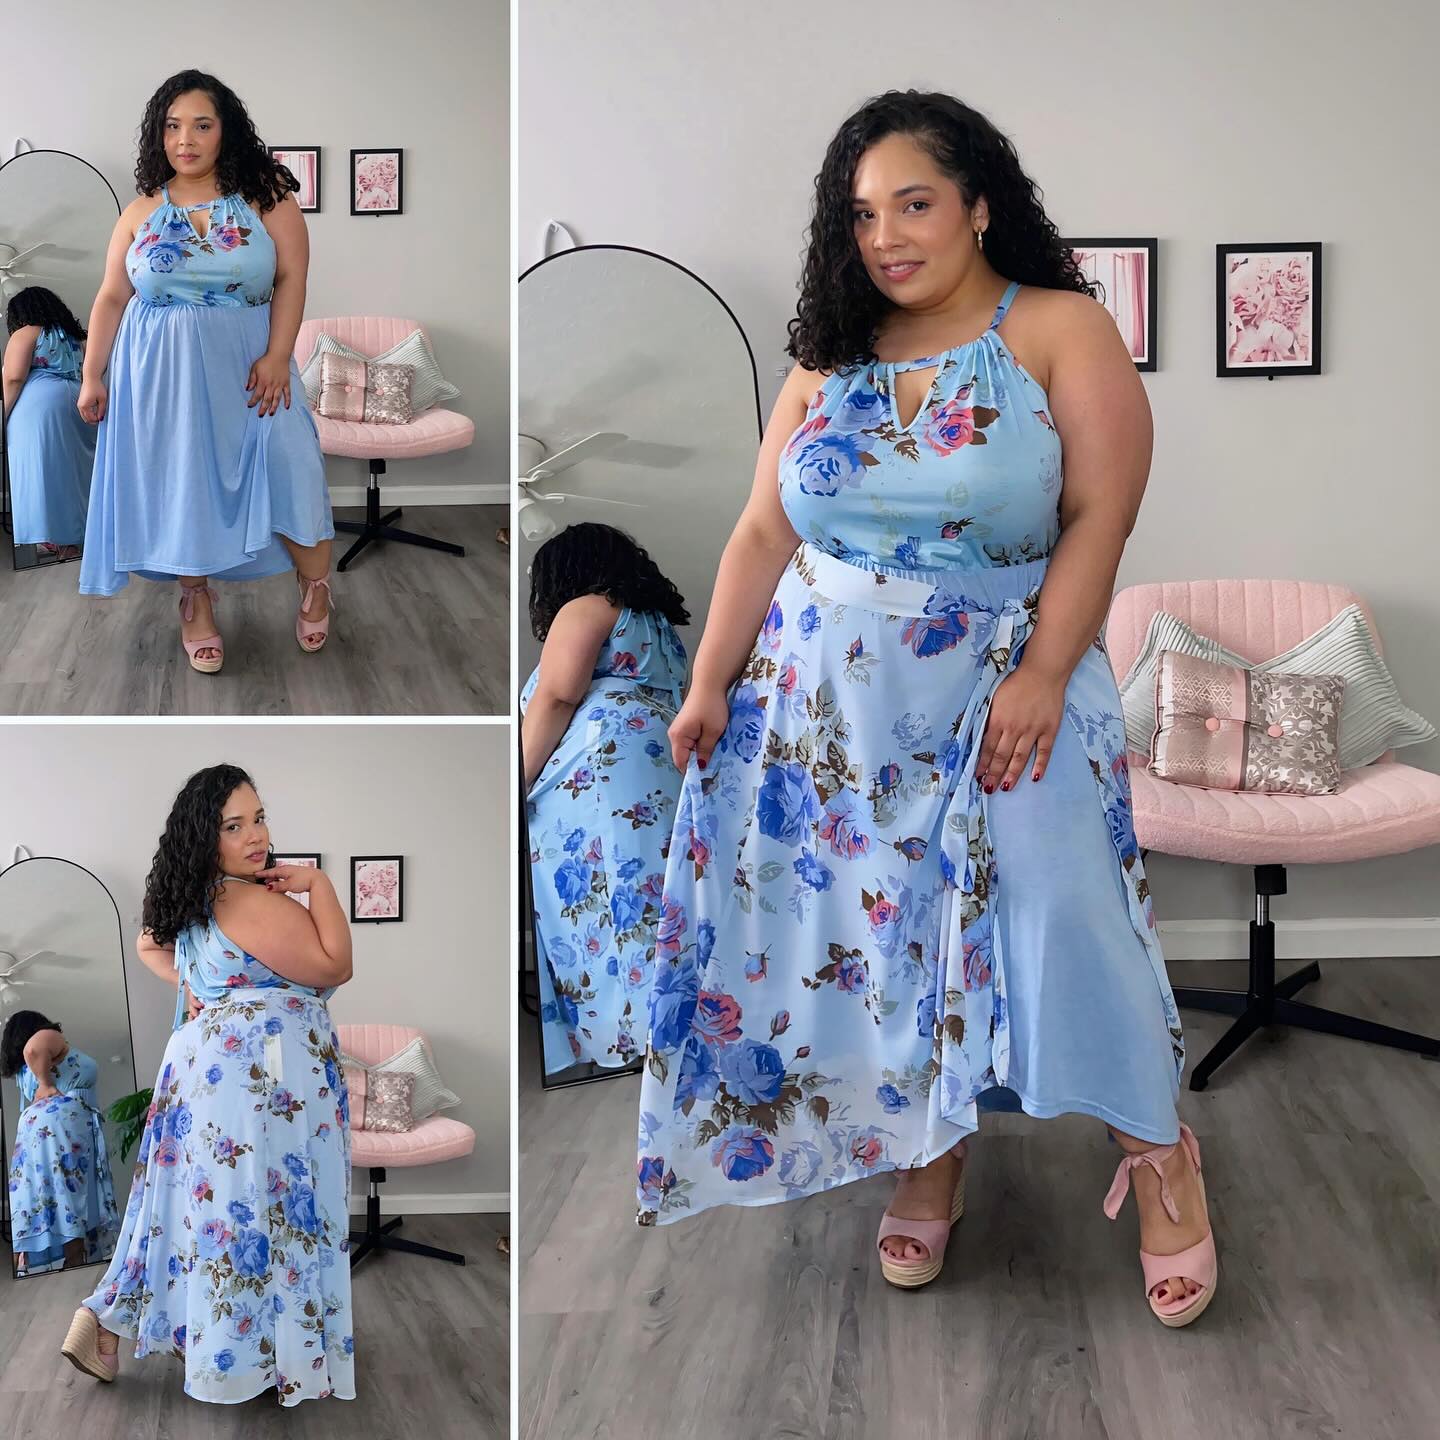 Mother’s Day is around the corner, this year @bloomchic has the cutest versatile dresses for you! 💕💐 

Shop My Styles Below . 
- Save 15% Discount code: Cardisego1 

• Everywhere Dress - Ditsy Floral Belted Dress
• Everywhere Dress - Colored Floral Belted 
• Everywhere Dress - Halter Floral Wrap Hem Dress
• Floral Mesh Ruched Adjustable Straps Dress
• Overlap Collar Striped Tie Knot Swim Dress

#BloomChic #BloomChicDress #Plussize #Plussizefashion #Plussizestyle #PlussizeBeauty #Curvy #curvystyle #curvyfashion #MyNurturingNature #mothersday2024 #bloomchiceverywheredress